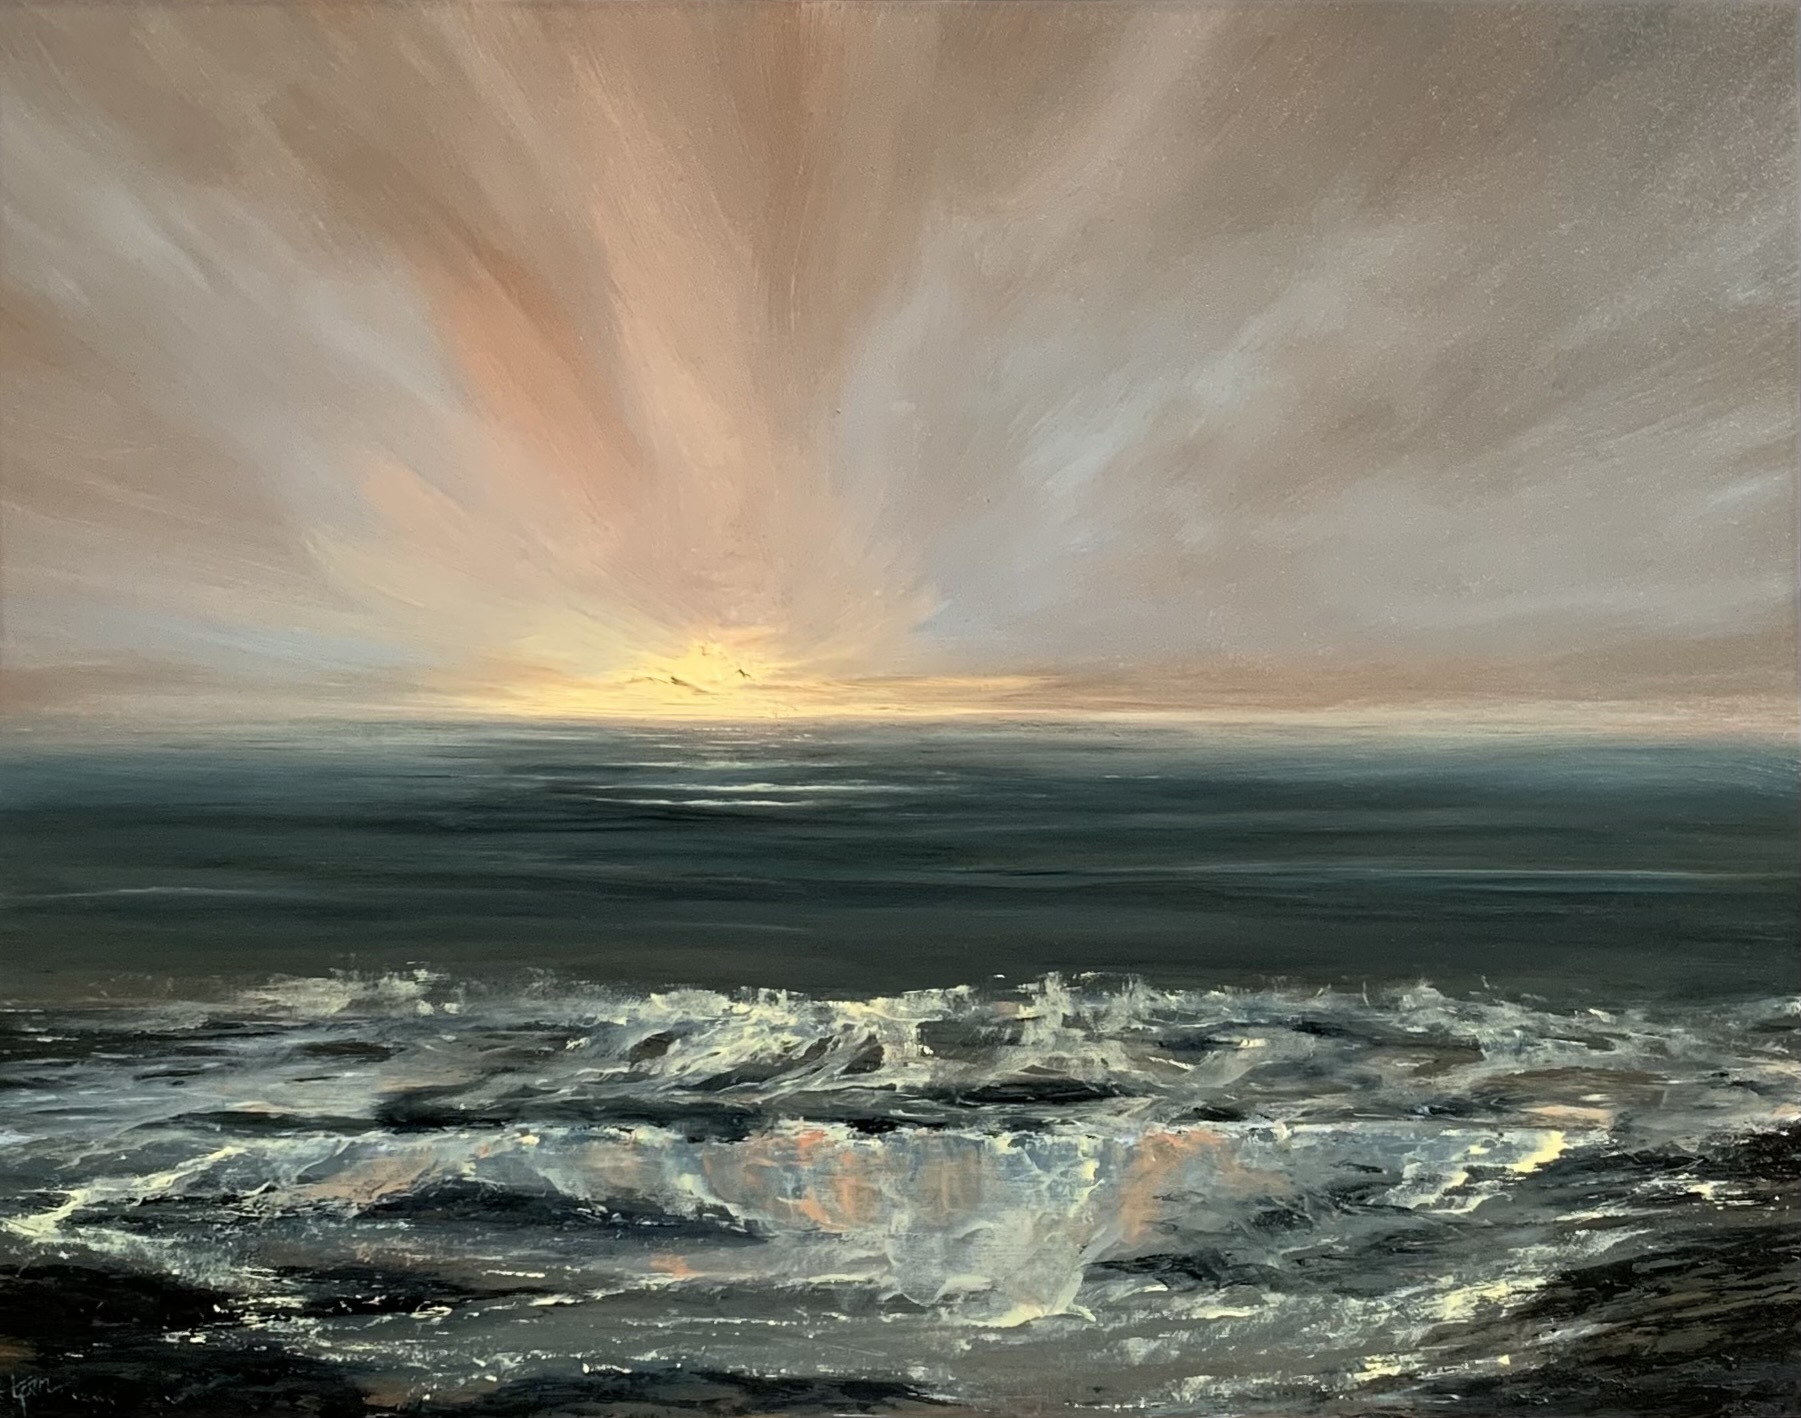 Photo of an original seascape oil painting by Tisha Mark, "The Morning Show (Week 11, 52 Weeks of Finding Light Series)" 11"x14" oil on Gessobord (2023). This painting shows an orange-toned sky sunrise over a moody, dark blue sea. A wave that has crashed onto the shore is reflecting bits of orange and yellow light of the sunrise as the water meanders along the rocks of the shoreline.